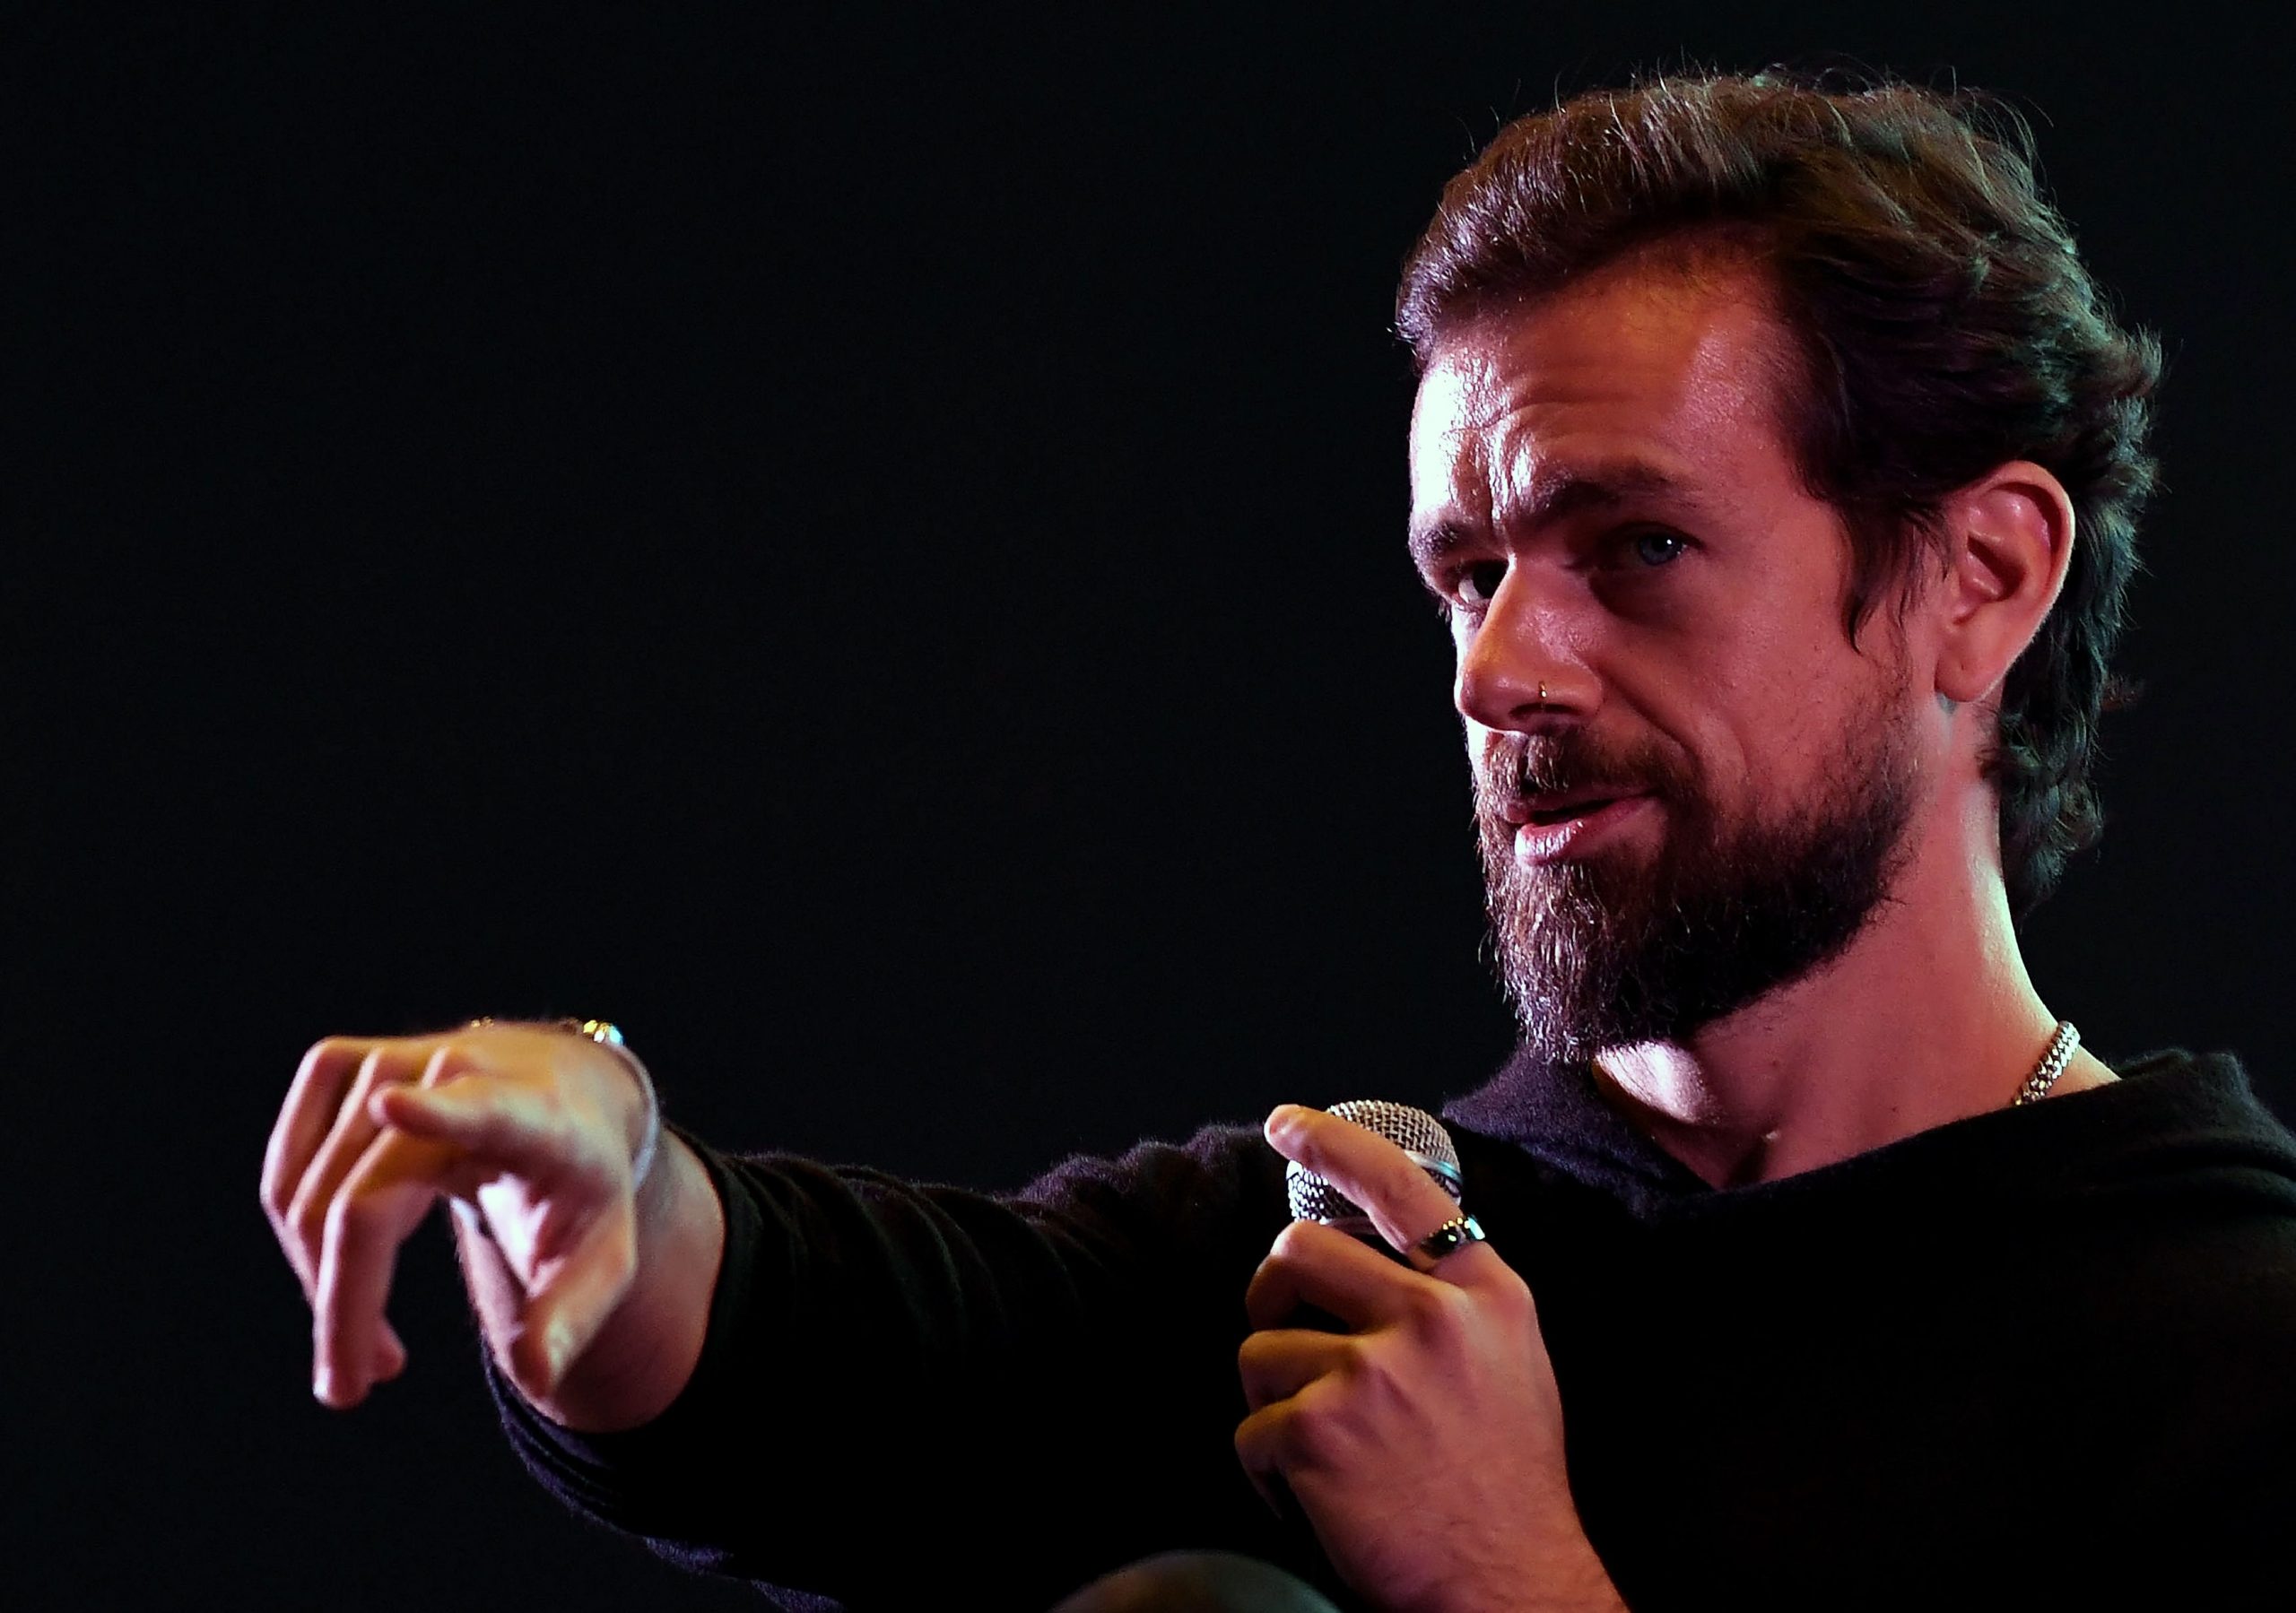 Twitter CEO Jack Dorsey likes tweet on Rihanna for backing farmers protests